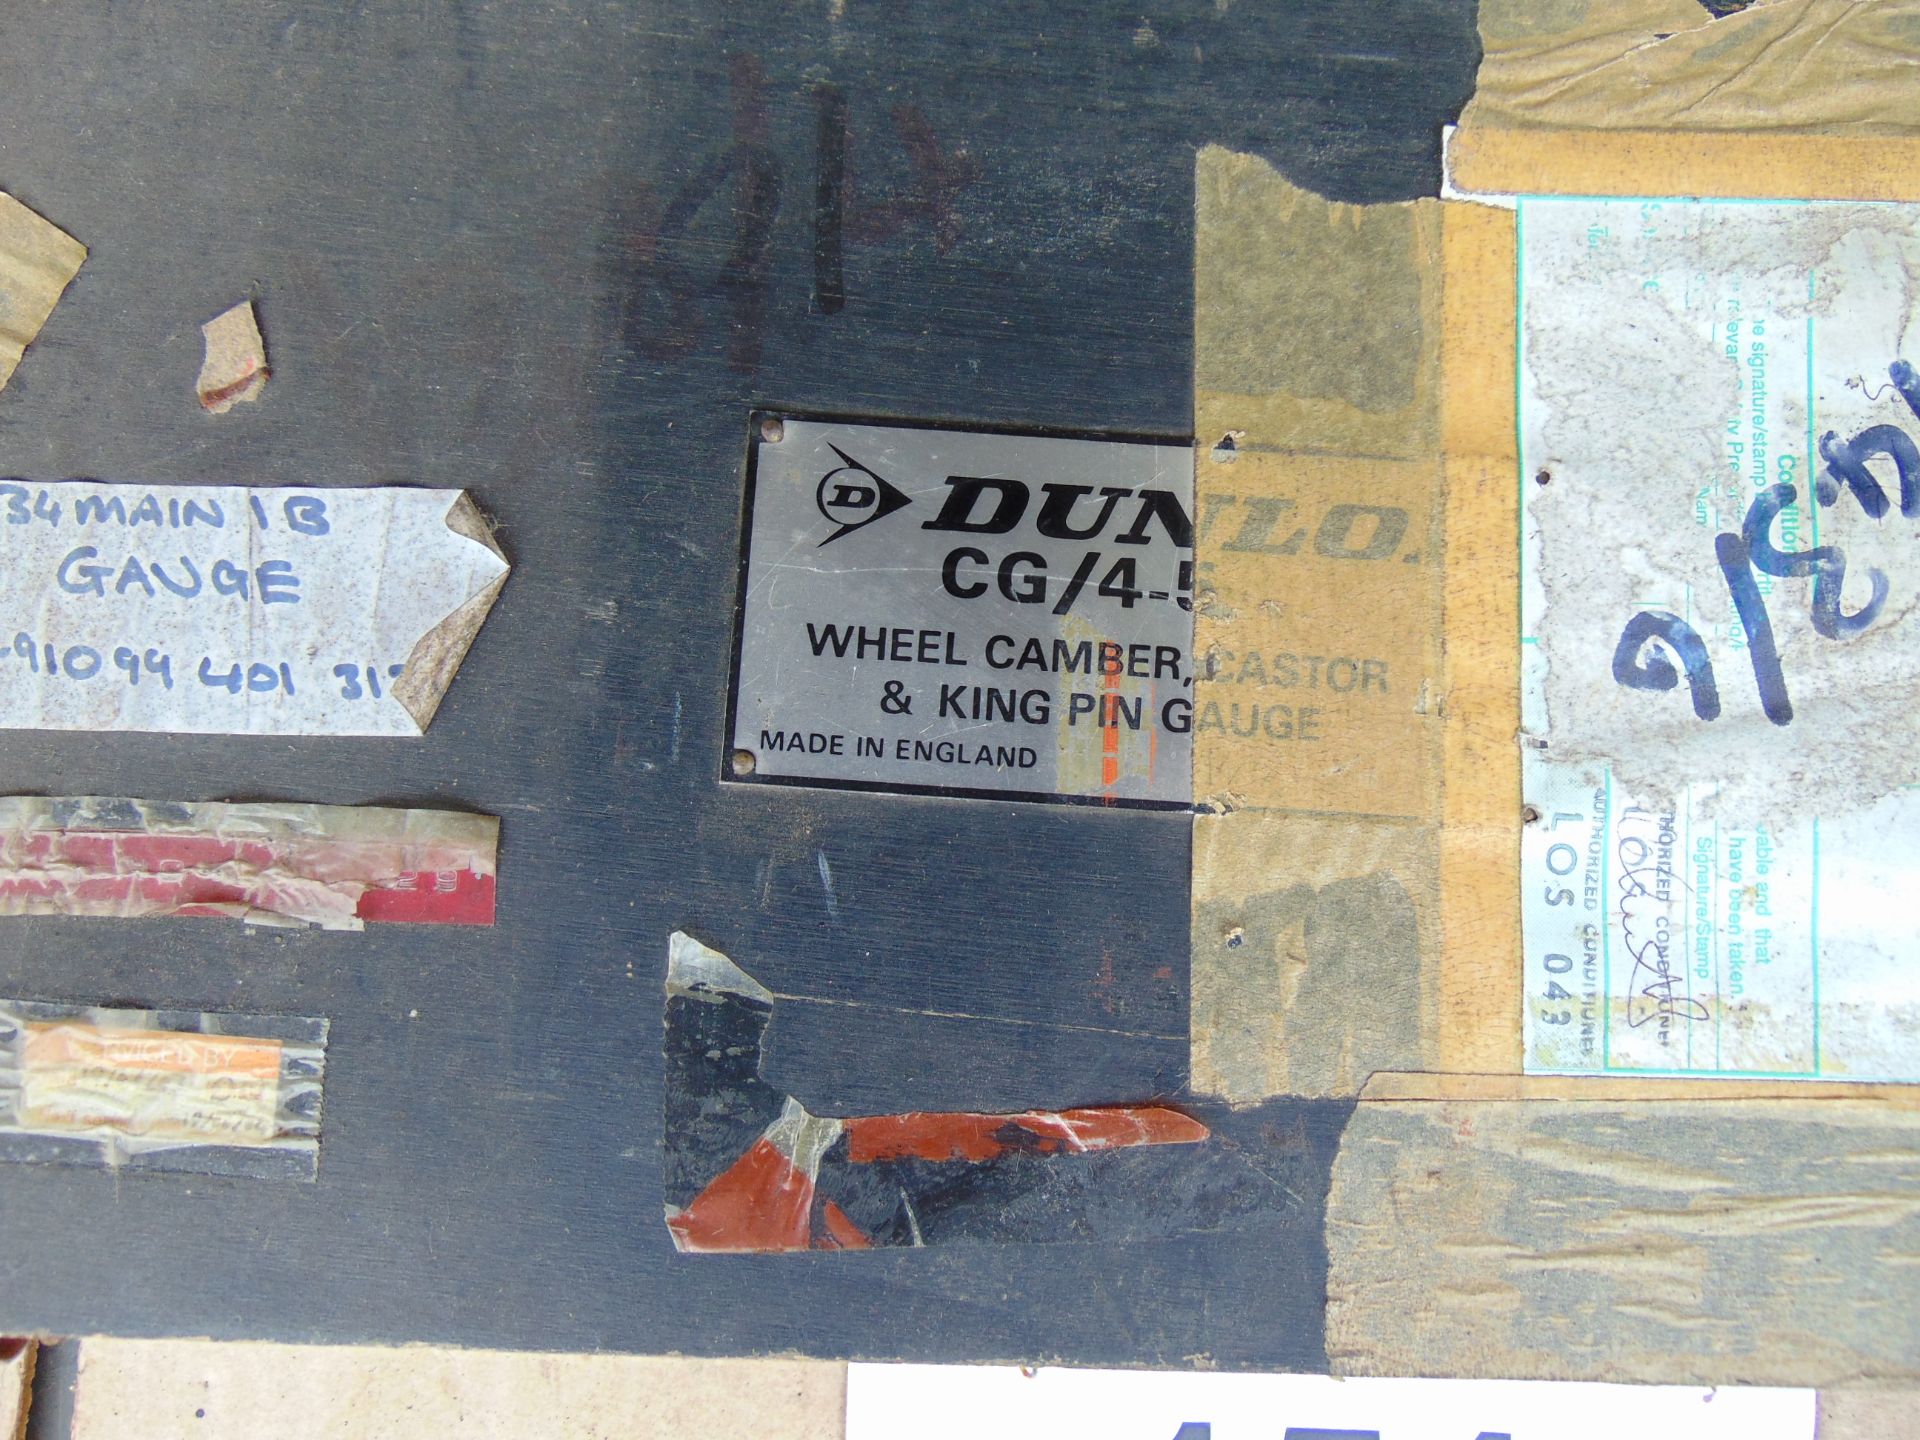 New Unissued Dunlop Wheel, Camber, Castor and King Pin Gauge Kit in Transit Case from MoD - Image 5 of 7